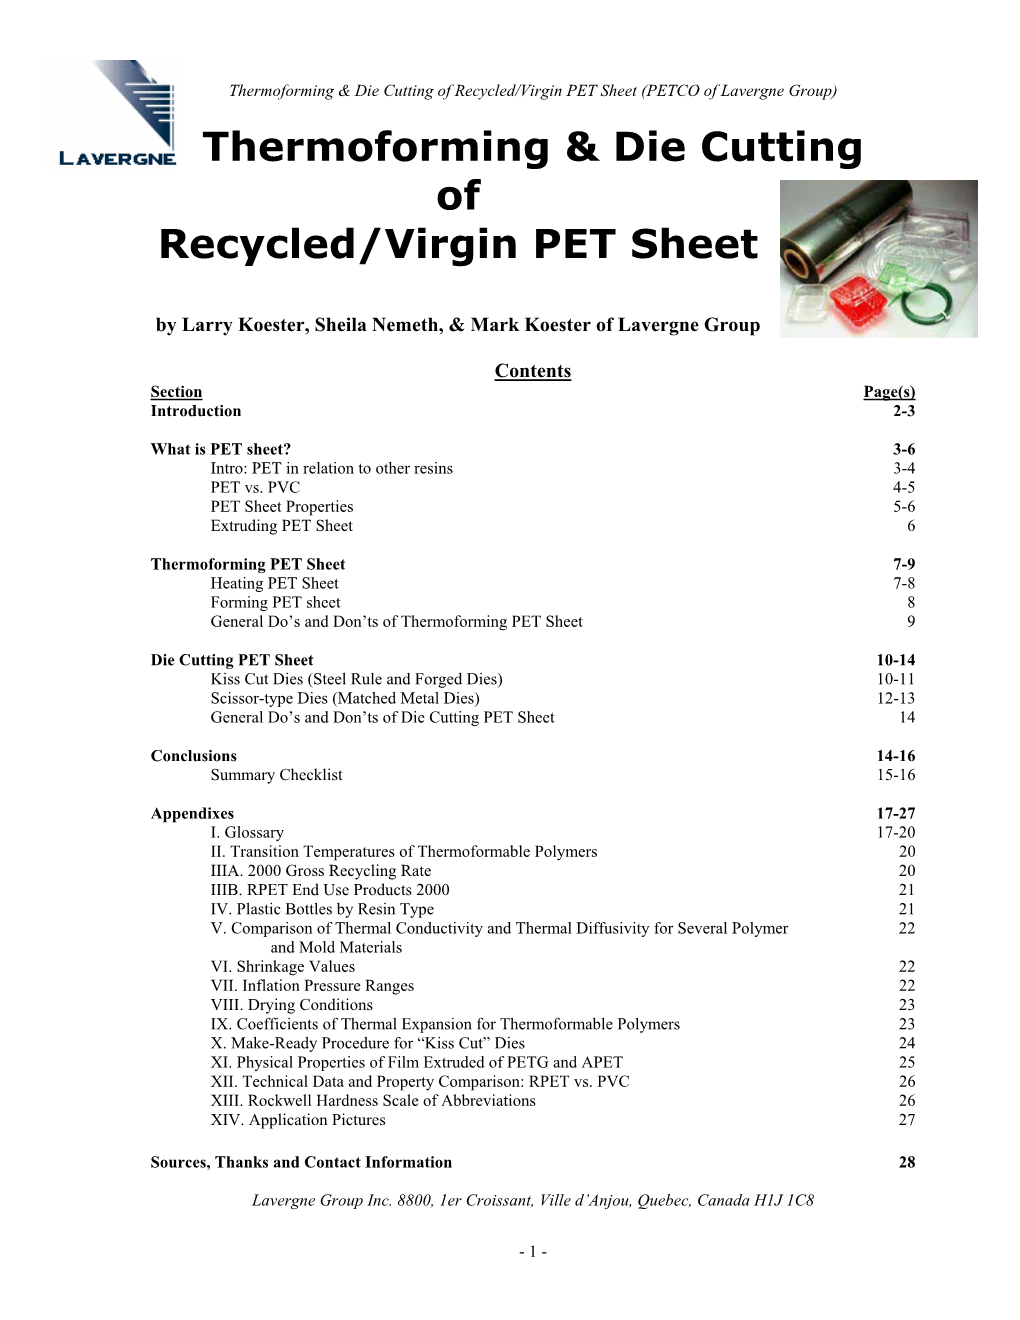 Thermoforming & Die Cutting of Recycled/Virgin PET Sheet